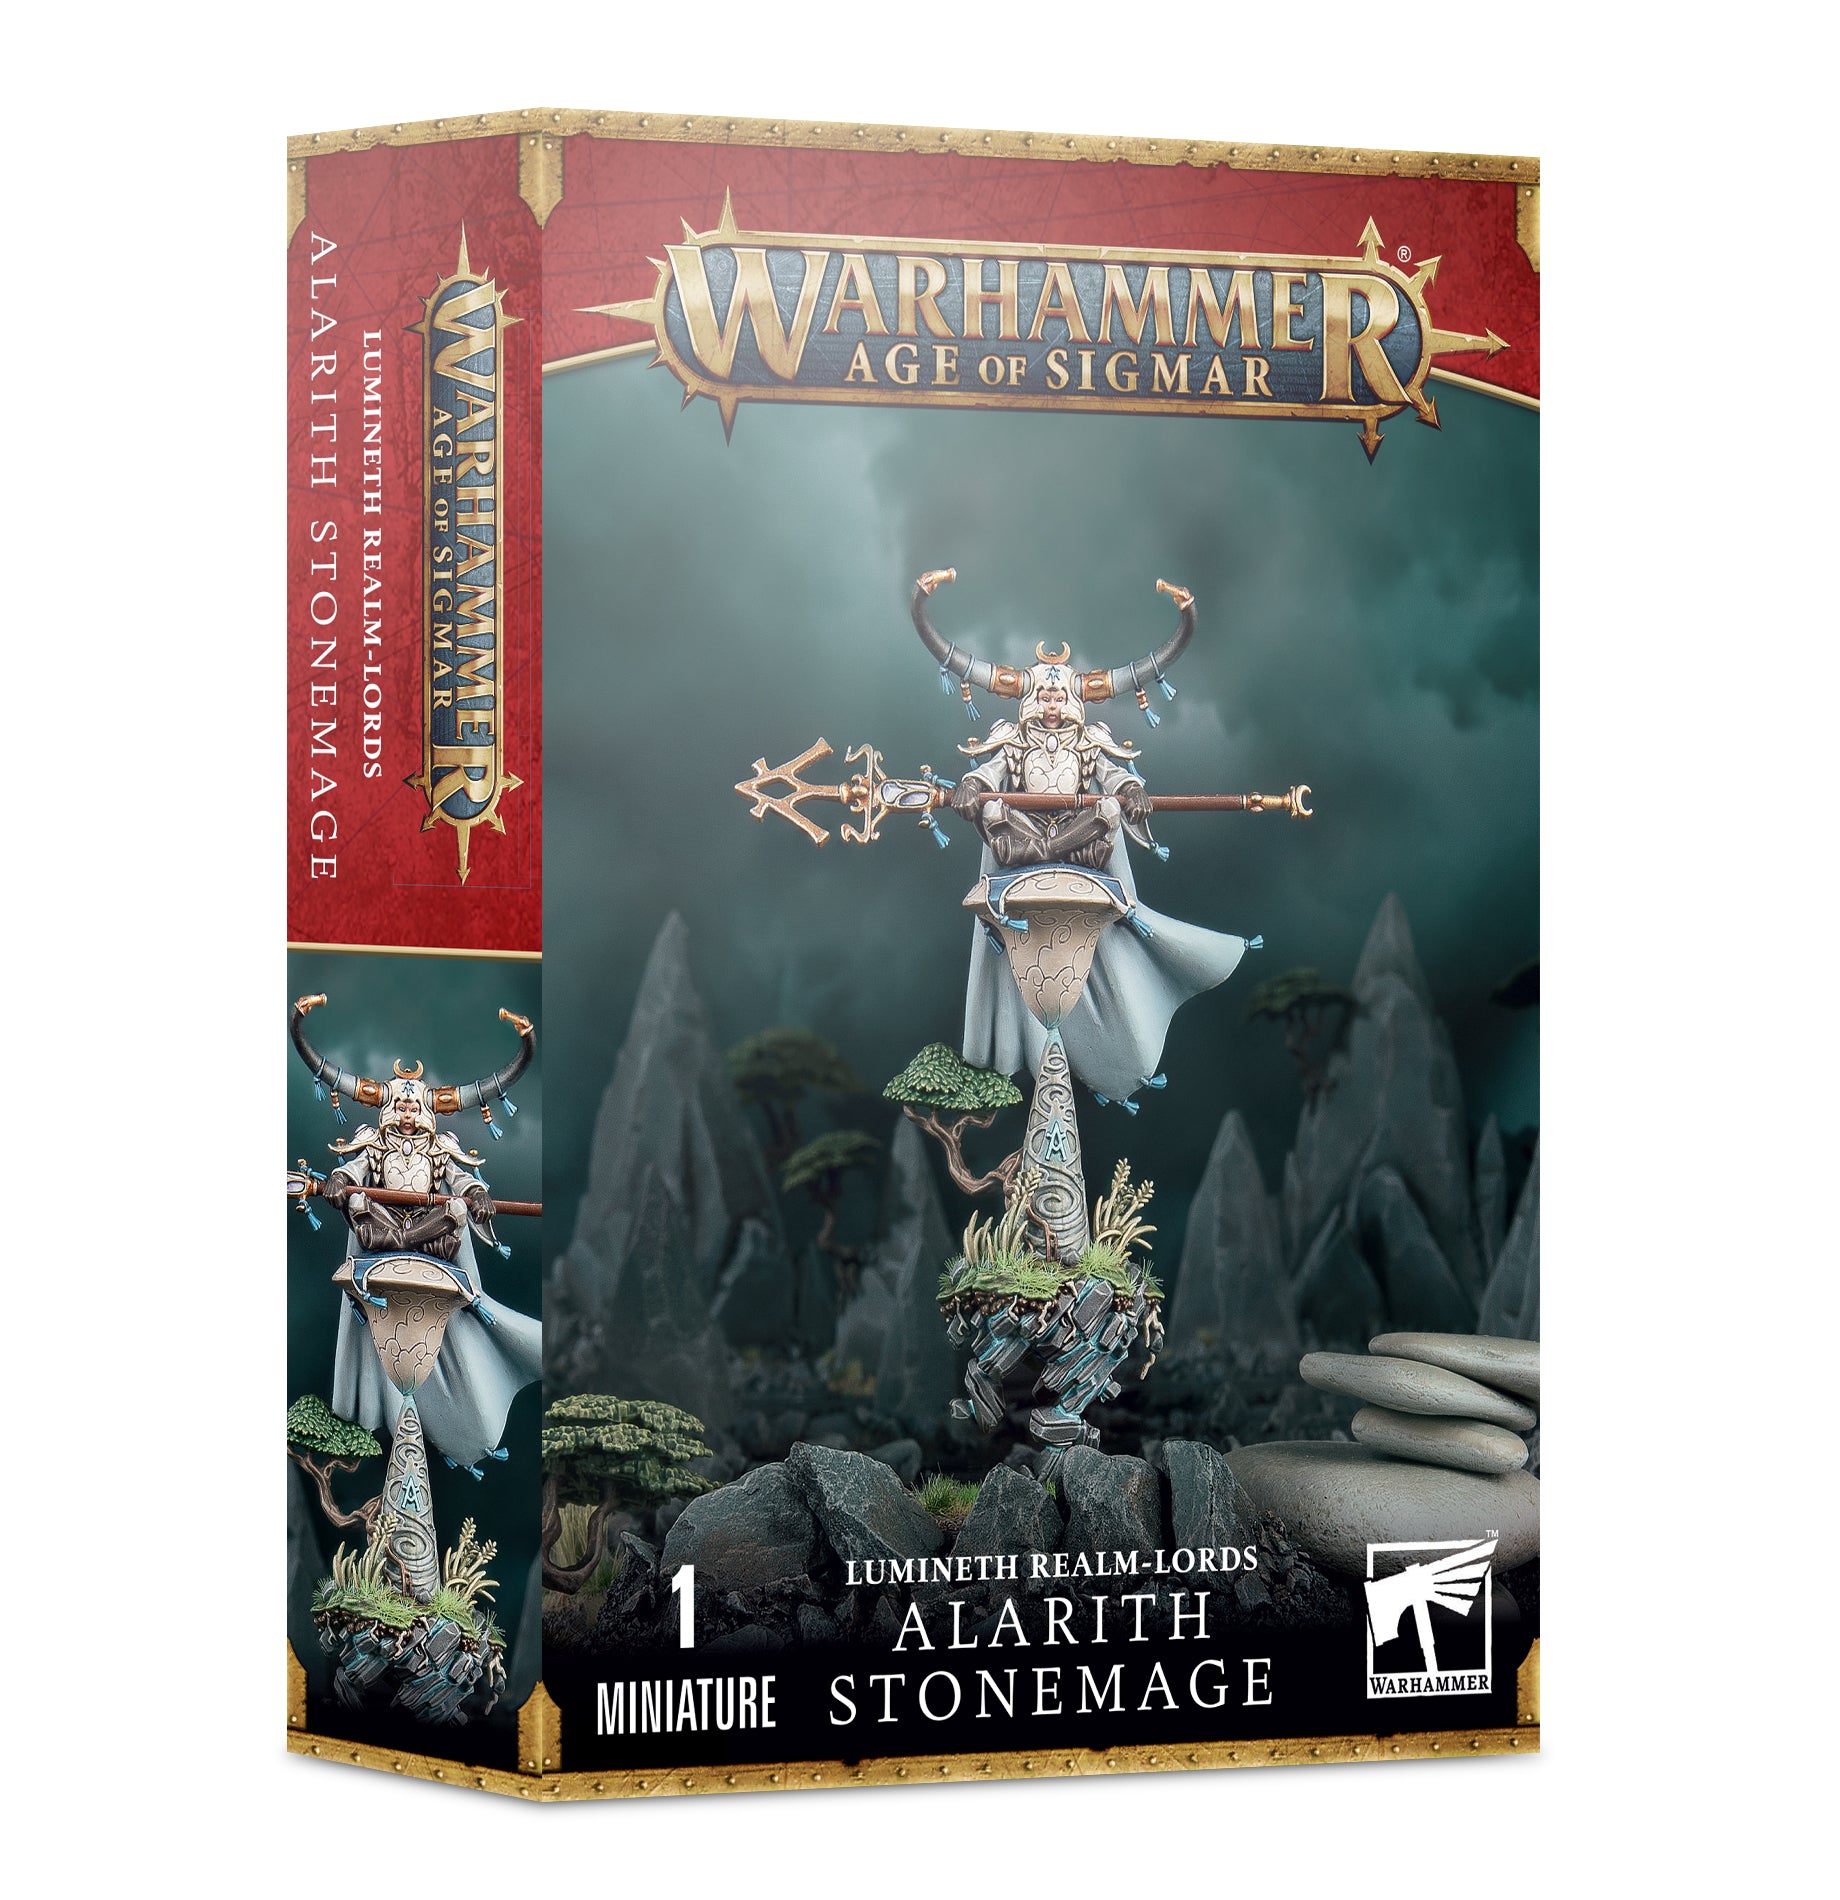 Warhammer Age of Sigmar: Lumineth Realm-lords Alarith Stonemage